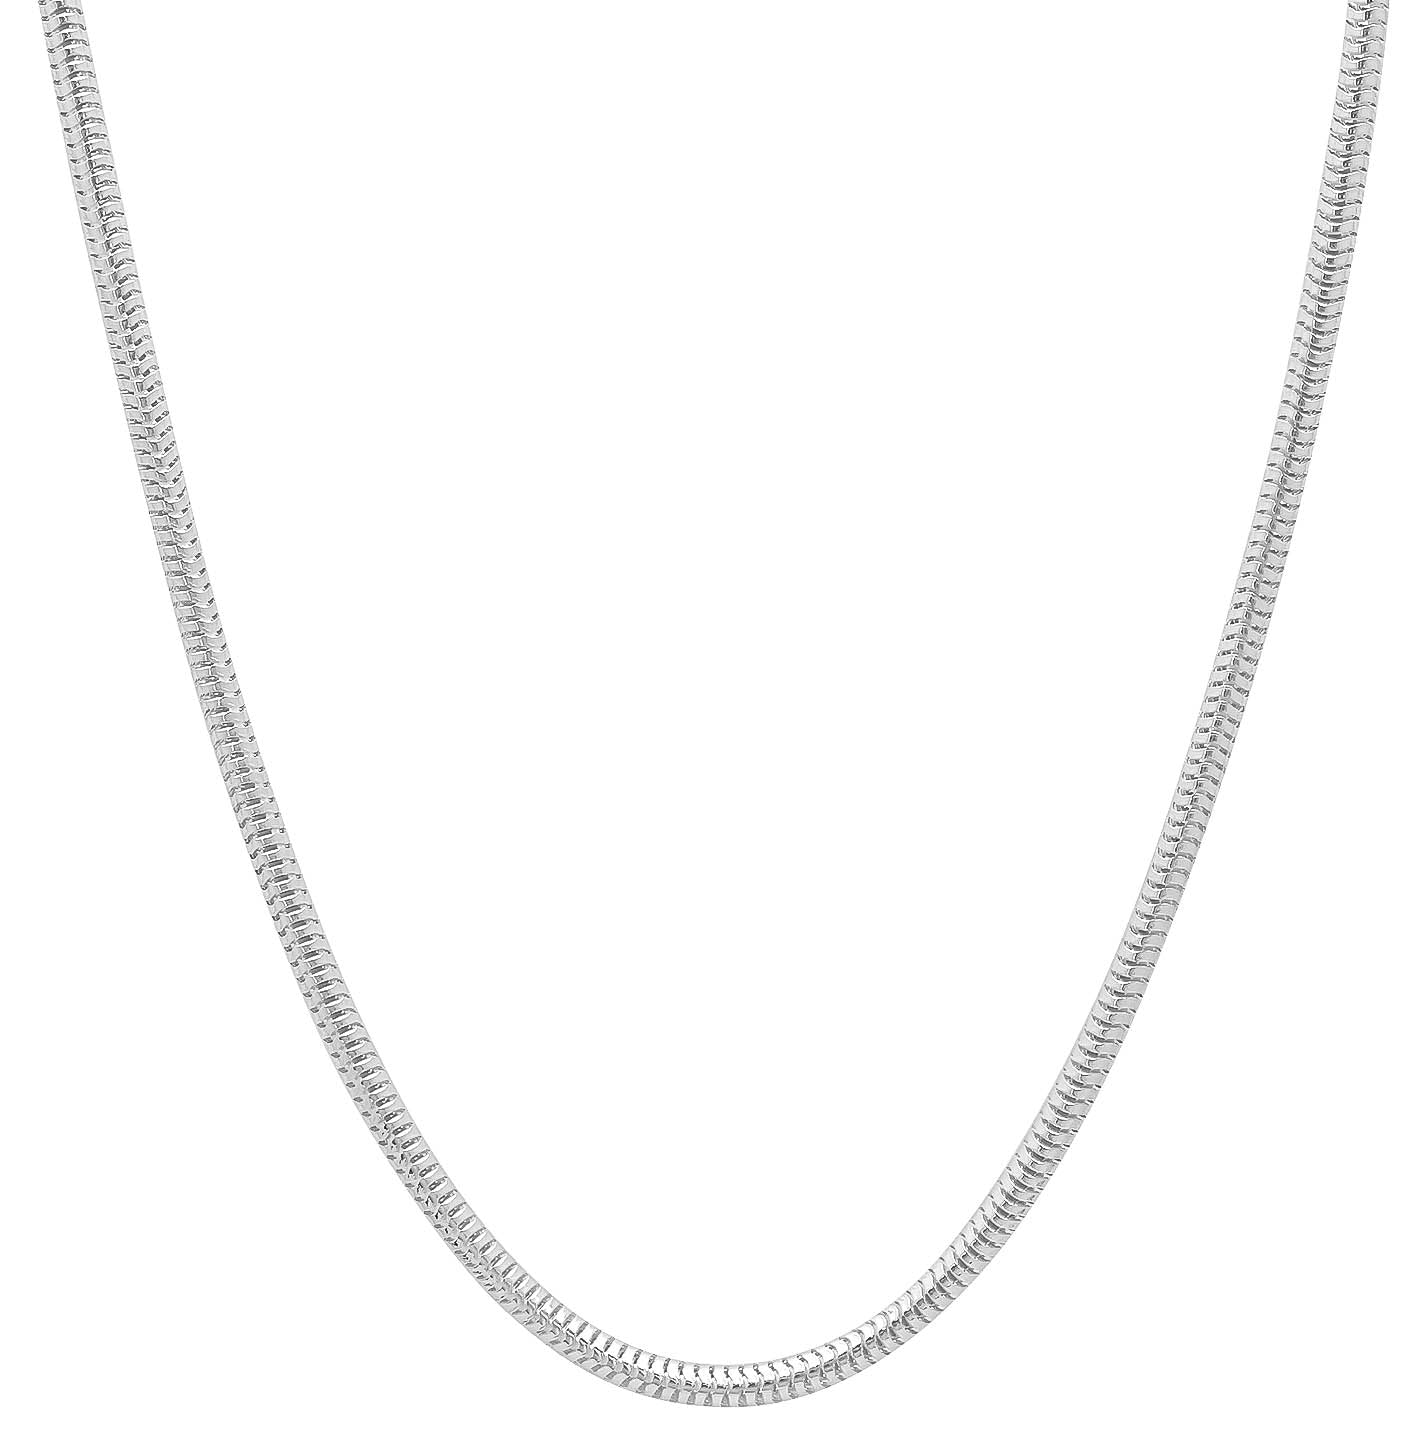 2mm High-Polished .925 Sterling Silver (Nickel Free) Round Snake Chain Necklace, 16'-30' (SKU: SS-SC20)